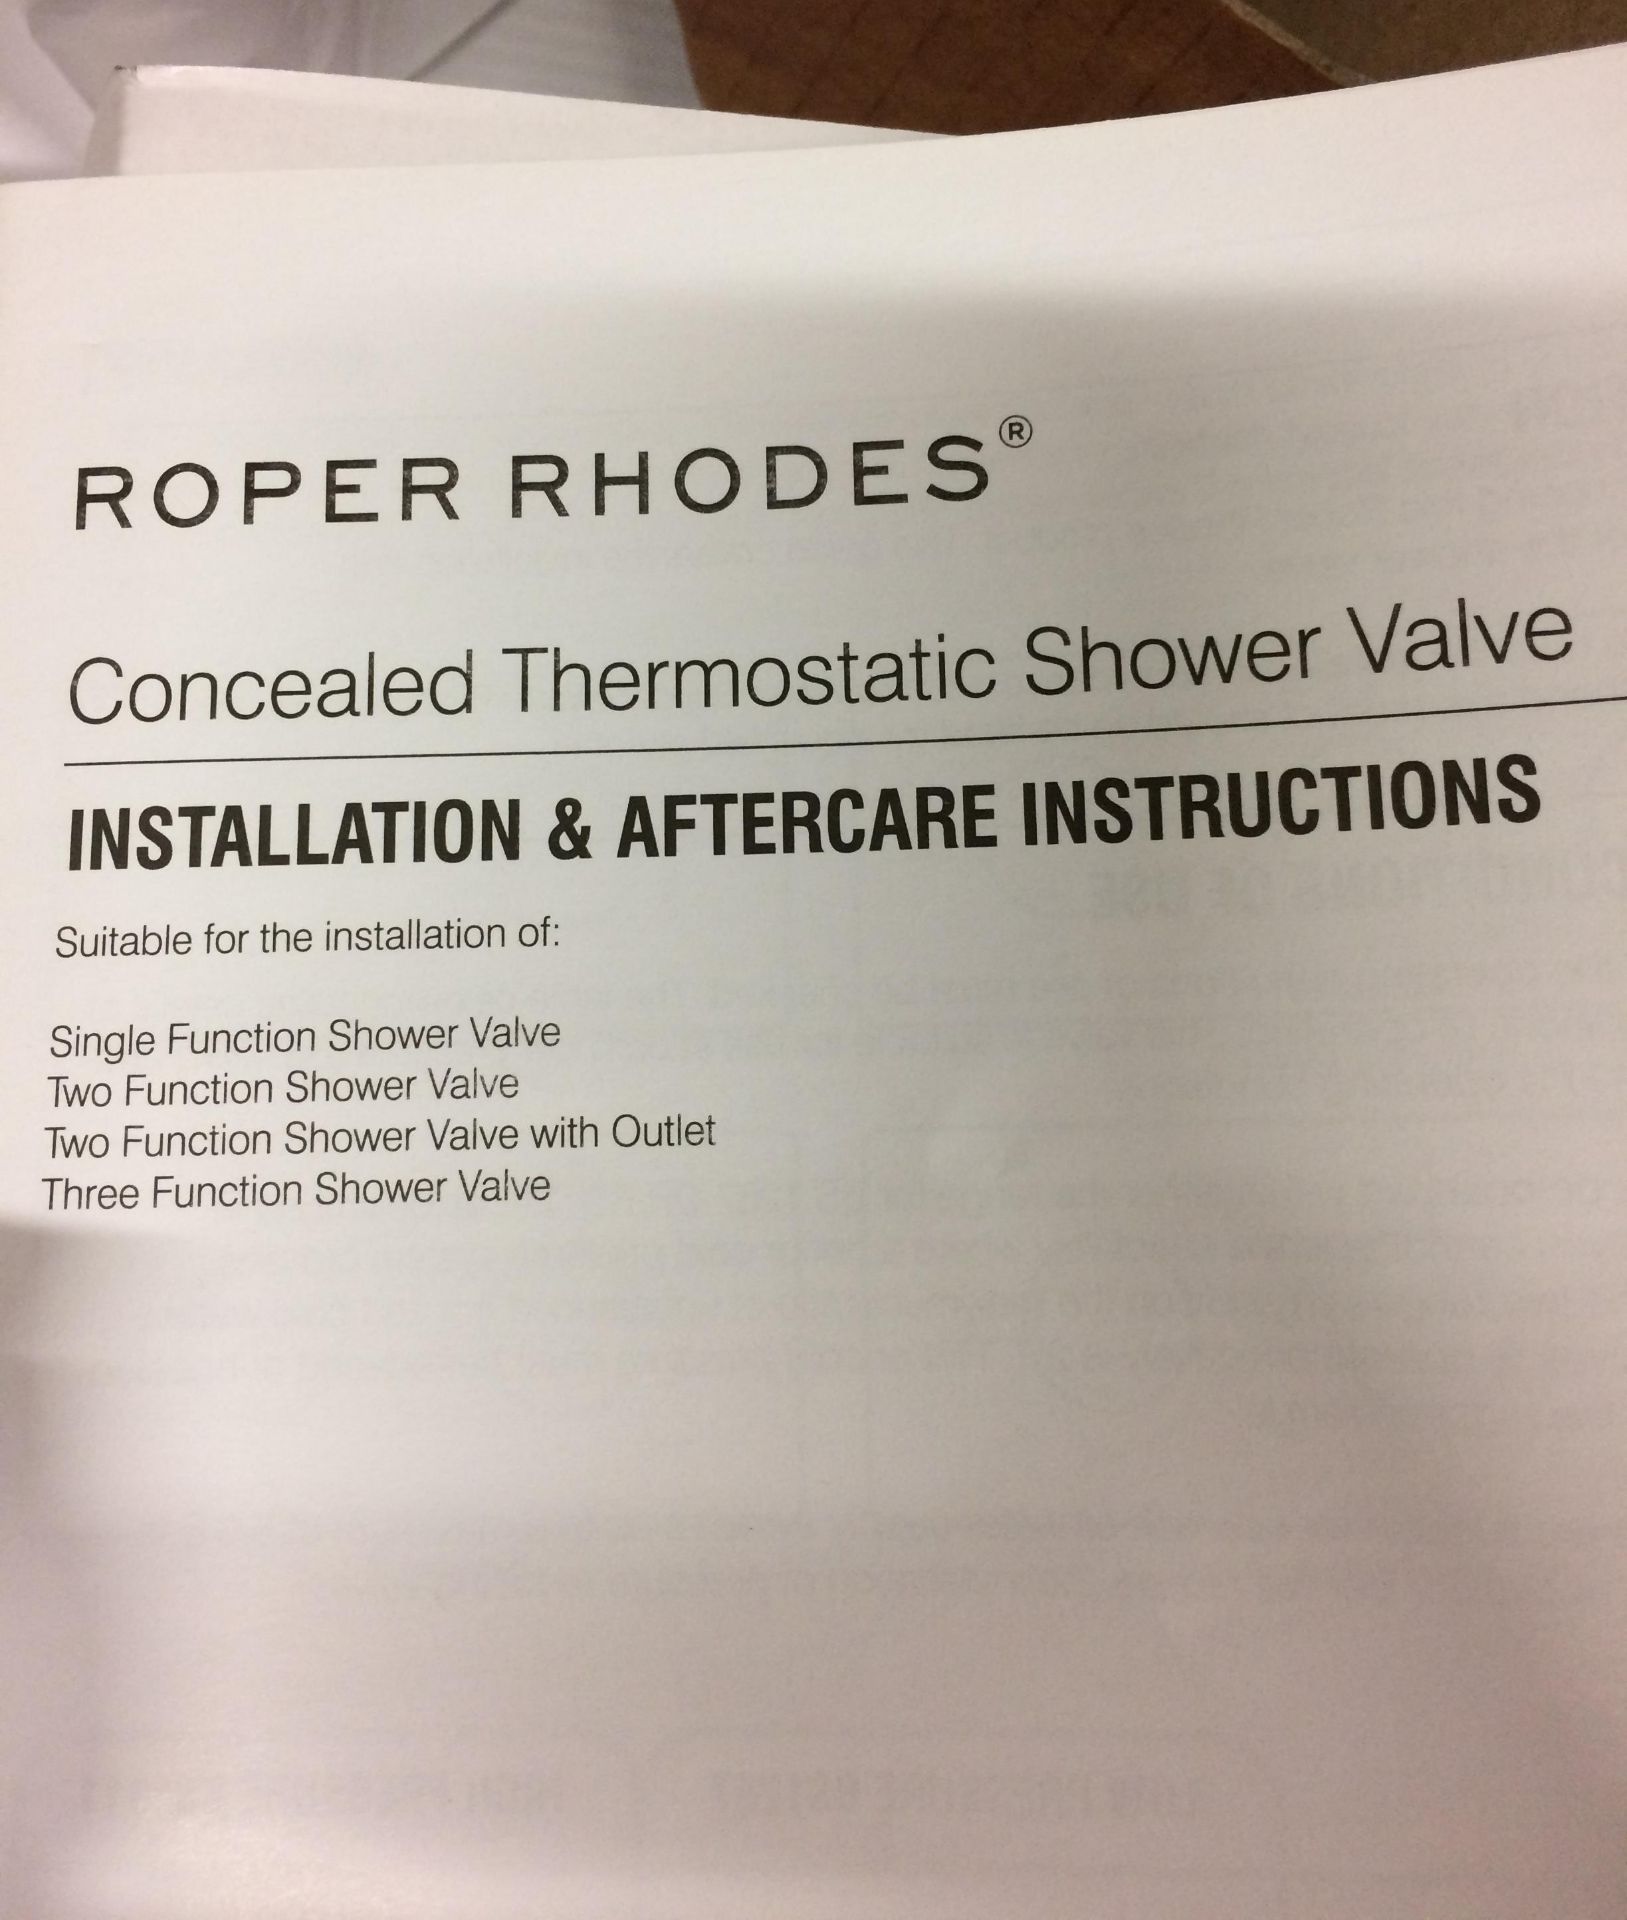 Roper Rhodes Elate dial function shower system with concealed thermostatic shower valve (SVSET91) - Image 2 of 3